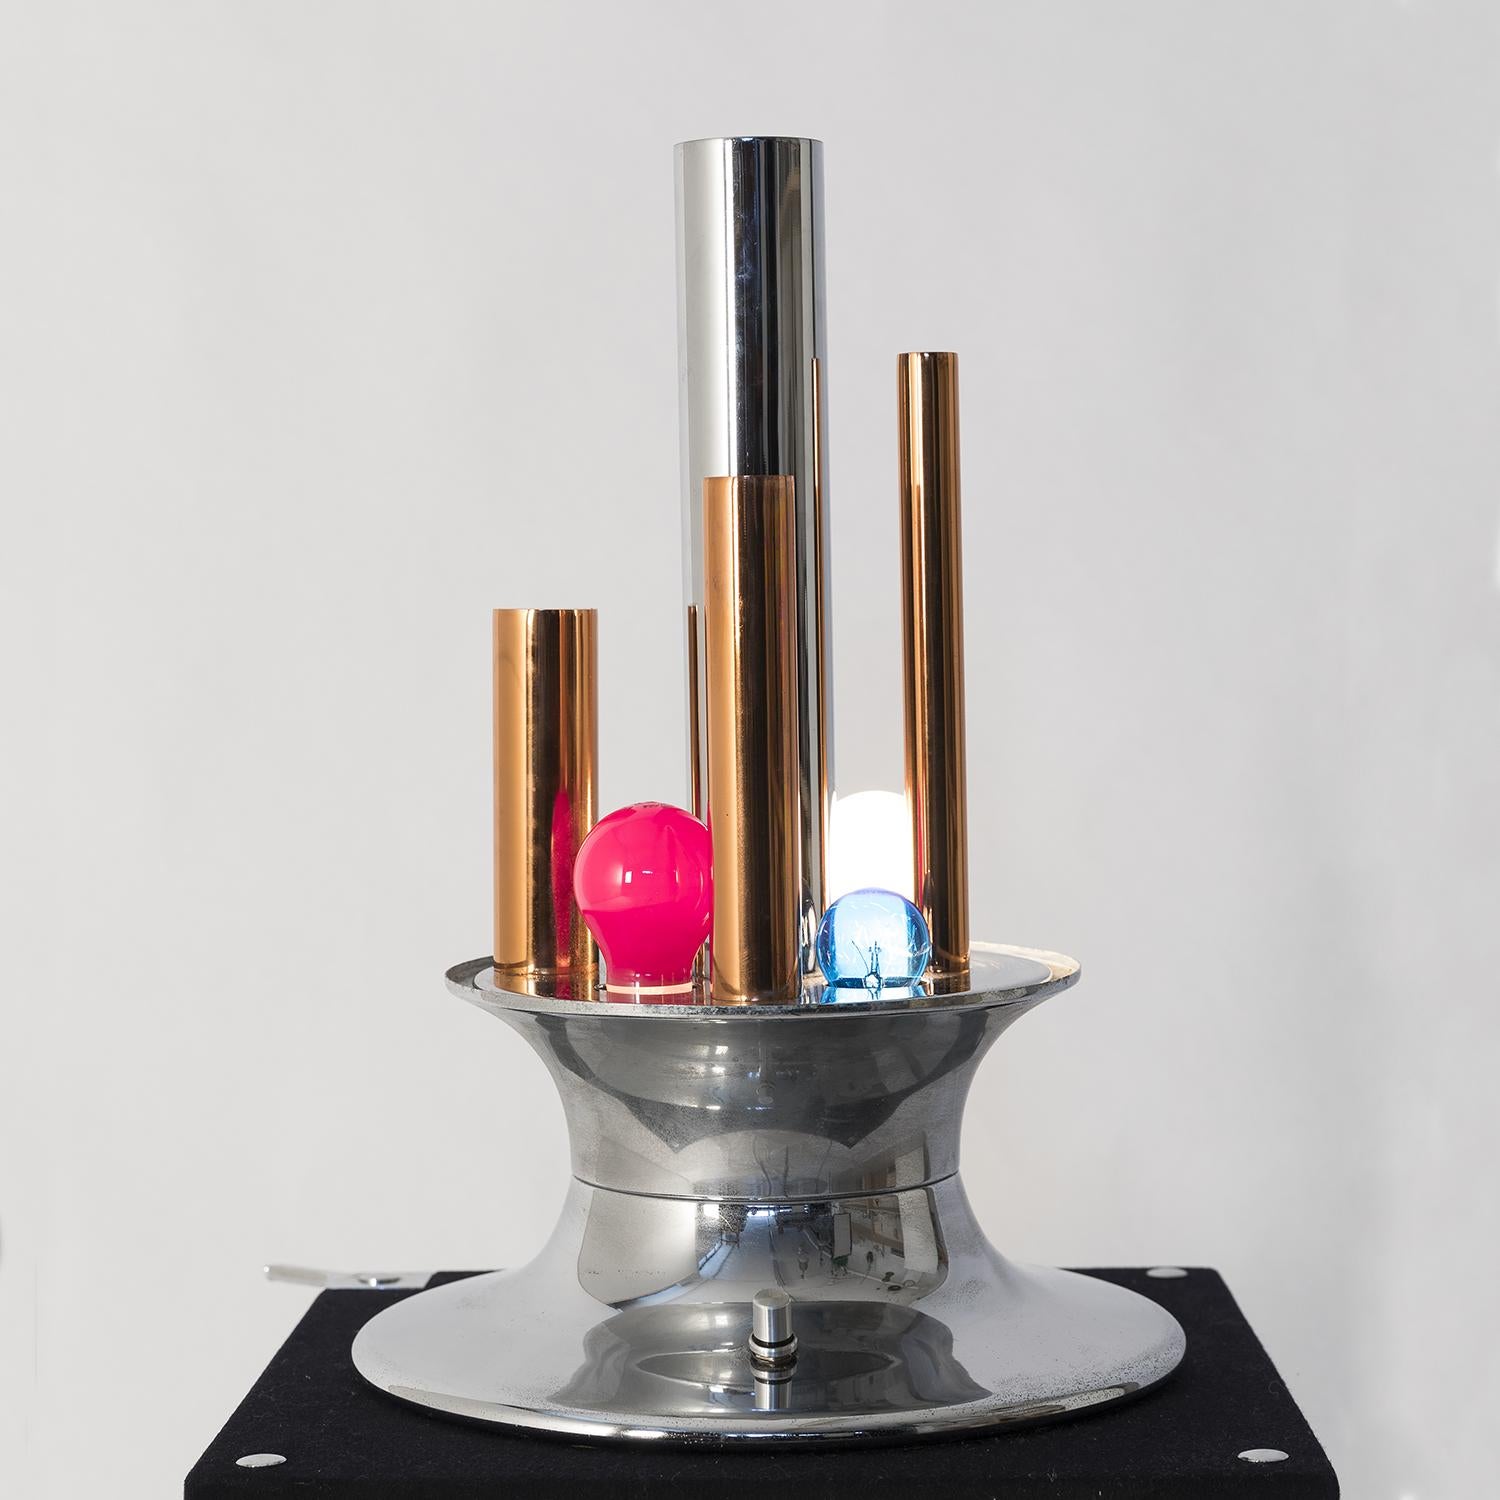 1970s table lamp manufactured by Selenova; brass and chrome columns and four colored bulbs (clear ones can fit as well) along with the shaded glass diffuser and the original working dimmer, create a pop light effect. Perfect condition and original